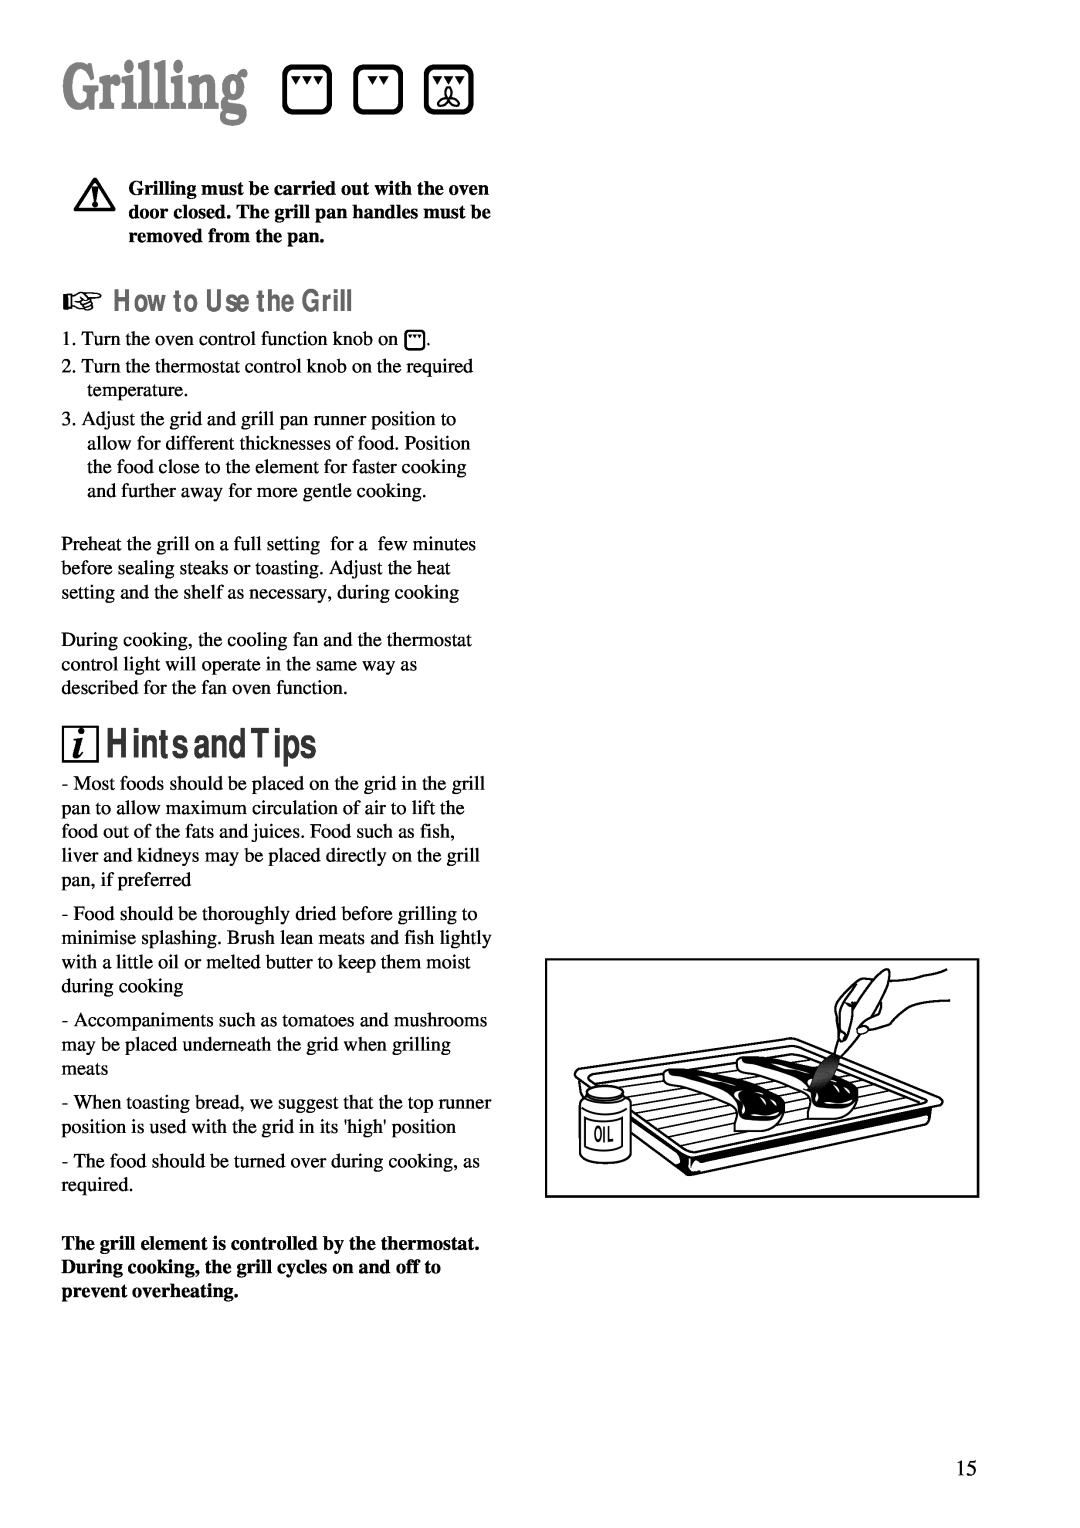 Zanussi ZBC 748 installation manual Grilling, How to Use the Grill, i Hints andTips 